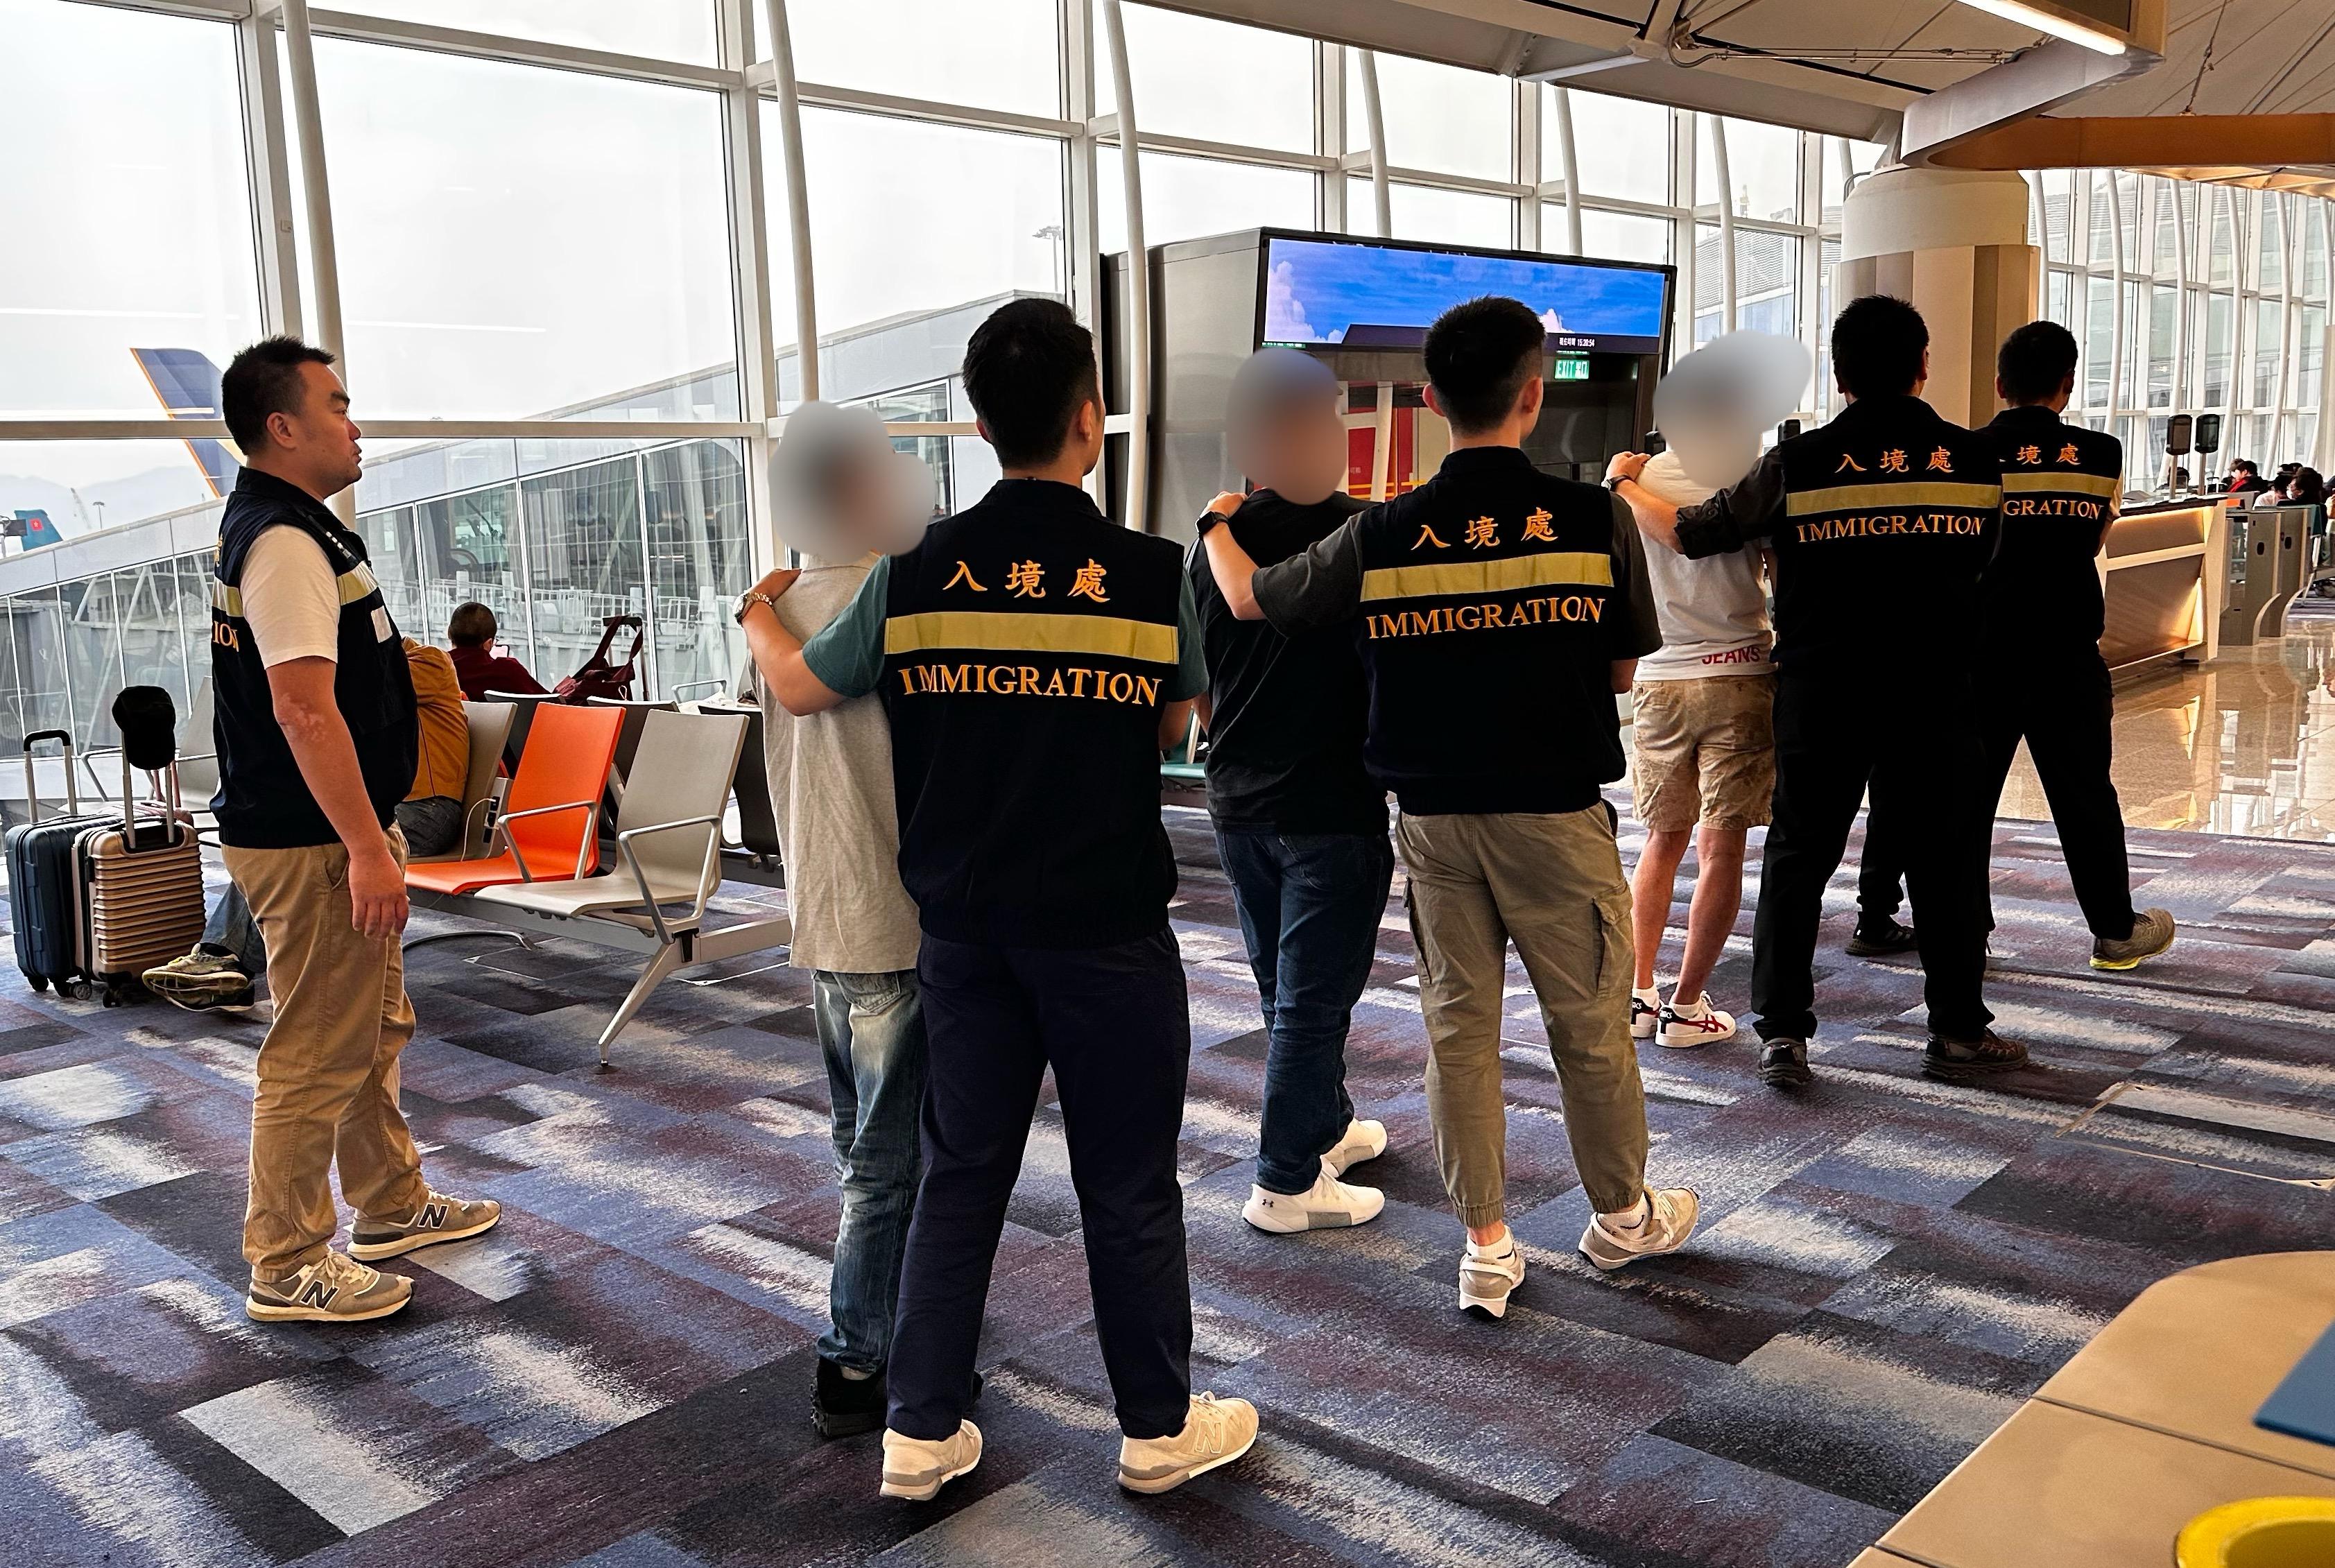 The Immigration Department (ImmD) carried out repatriation operation yesterday (May 12). A total of 23 Vietnamese illegal immigrants were repatriated to Vietnam. Photo shows removees being escorted by ImmD officers to depart Hong Kong.